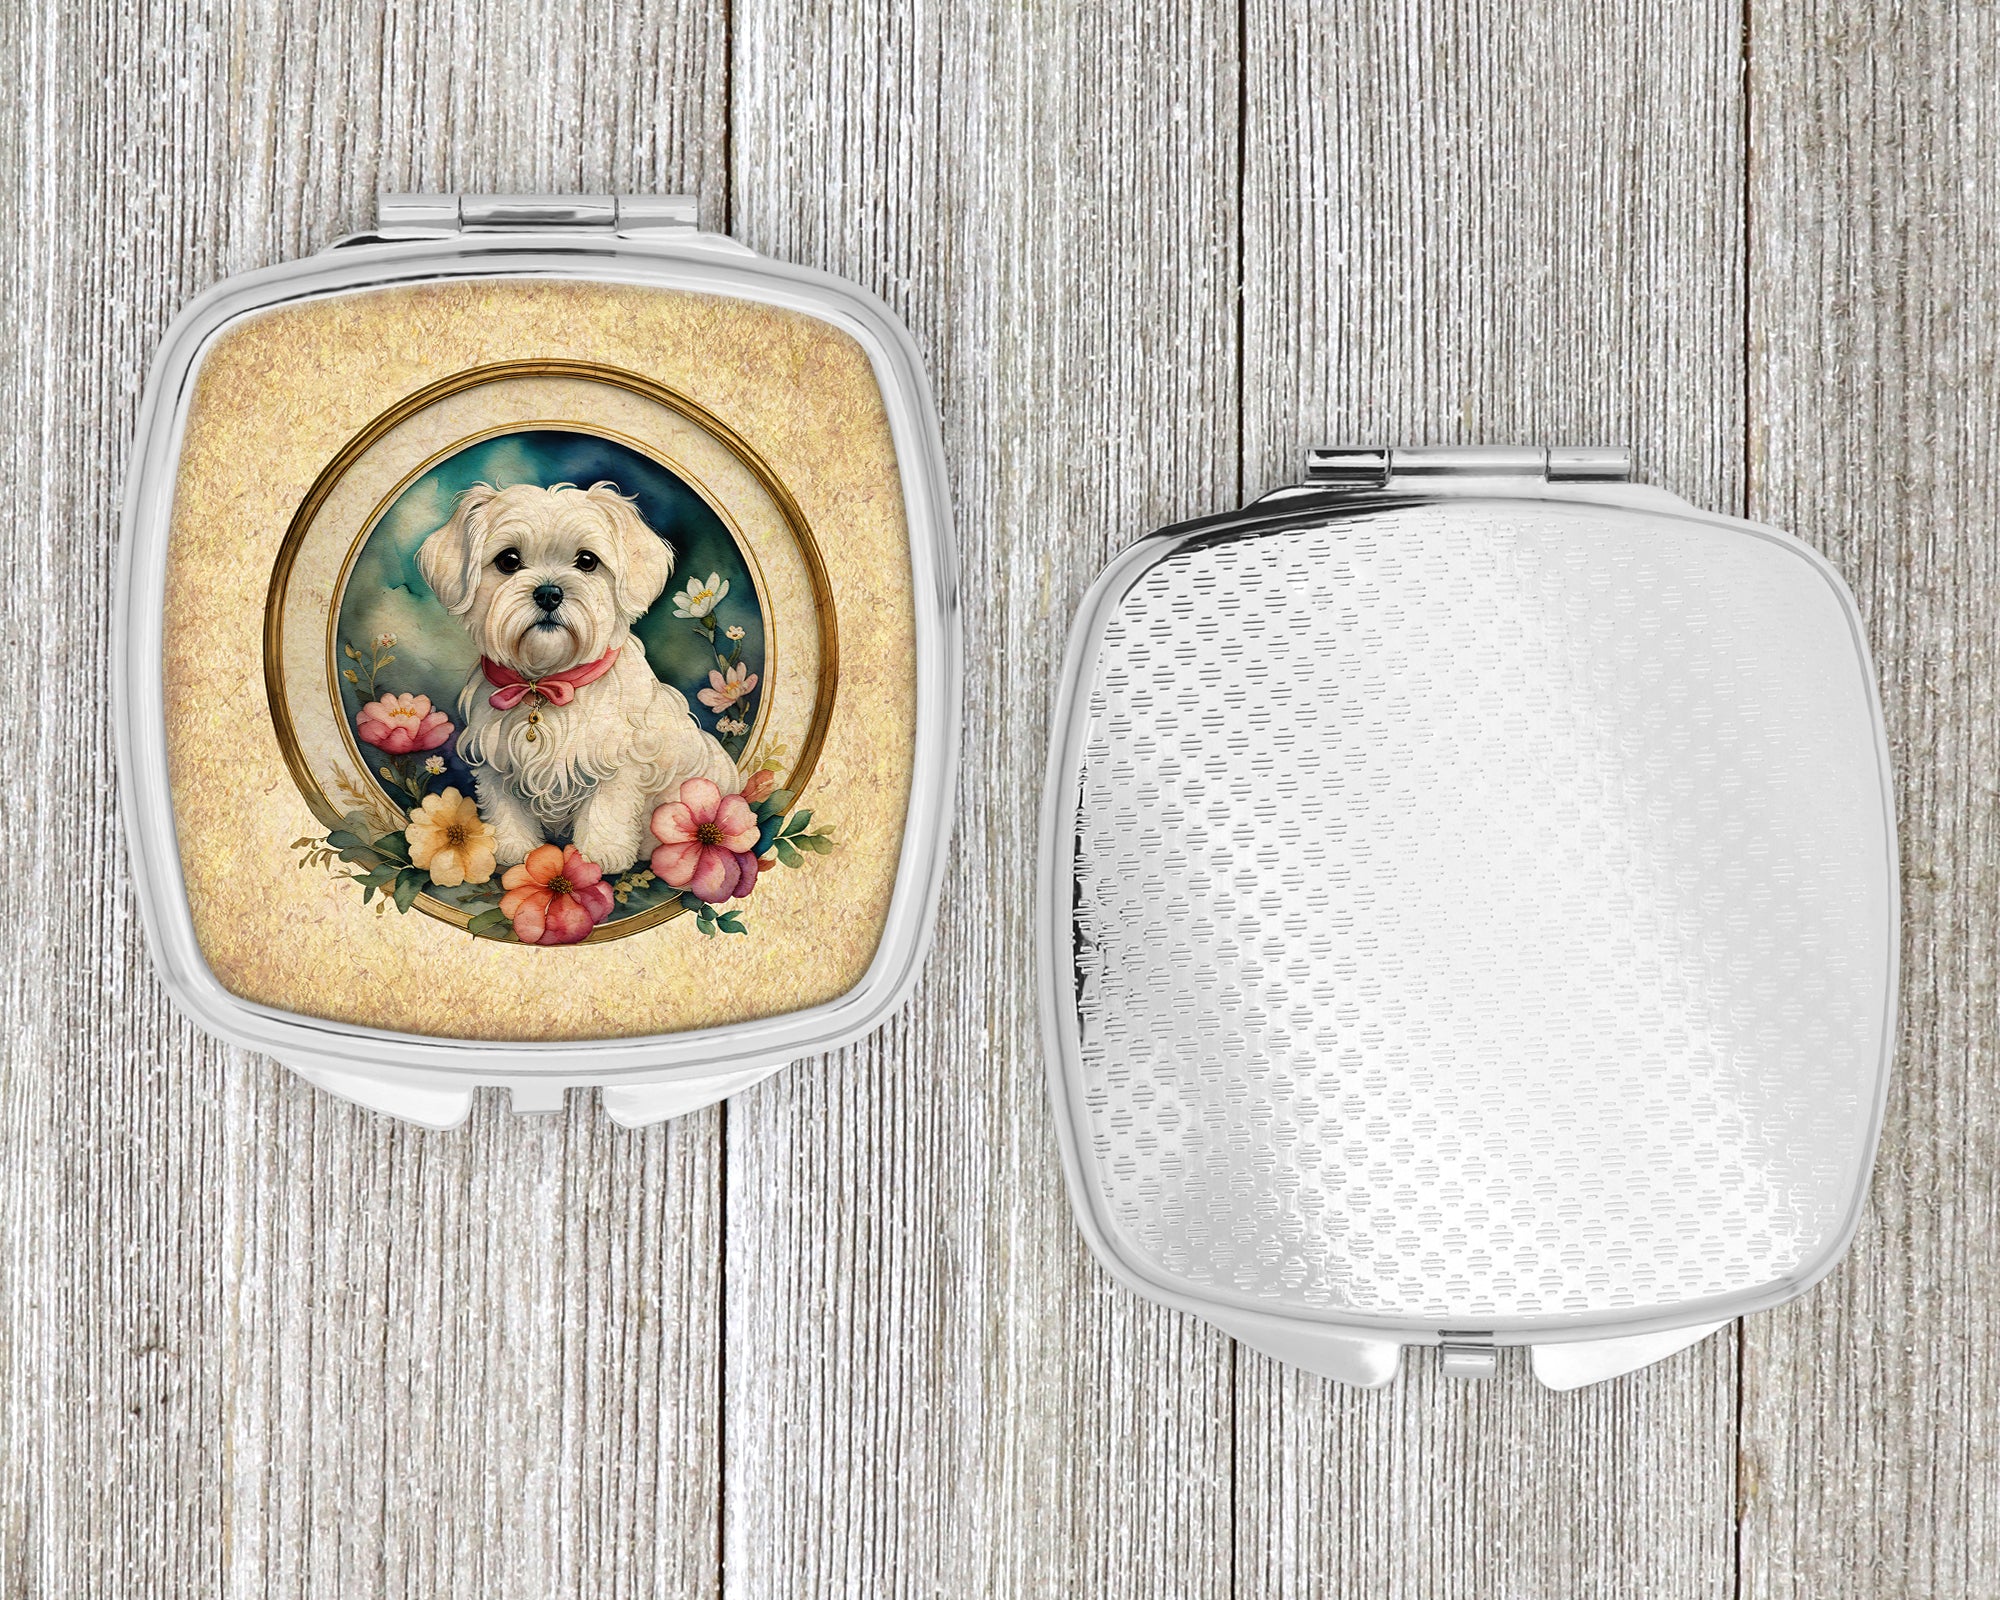 Maltese and Flowers Compact Mirror